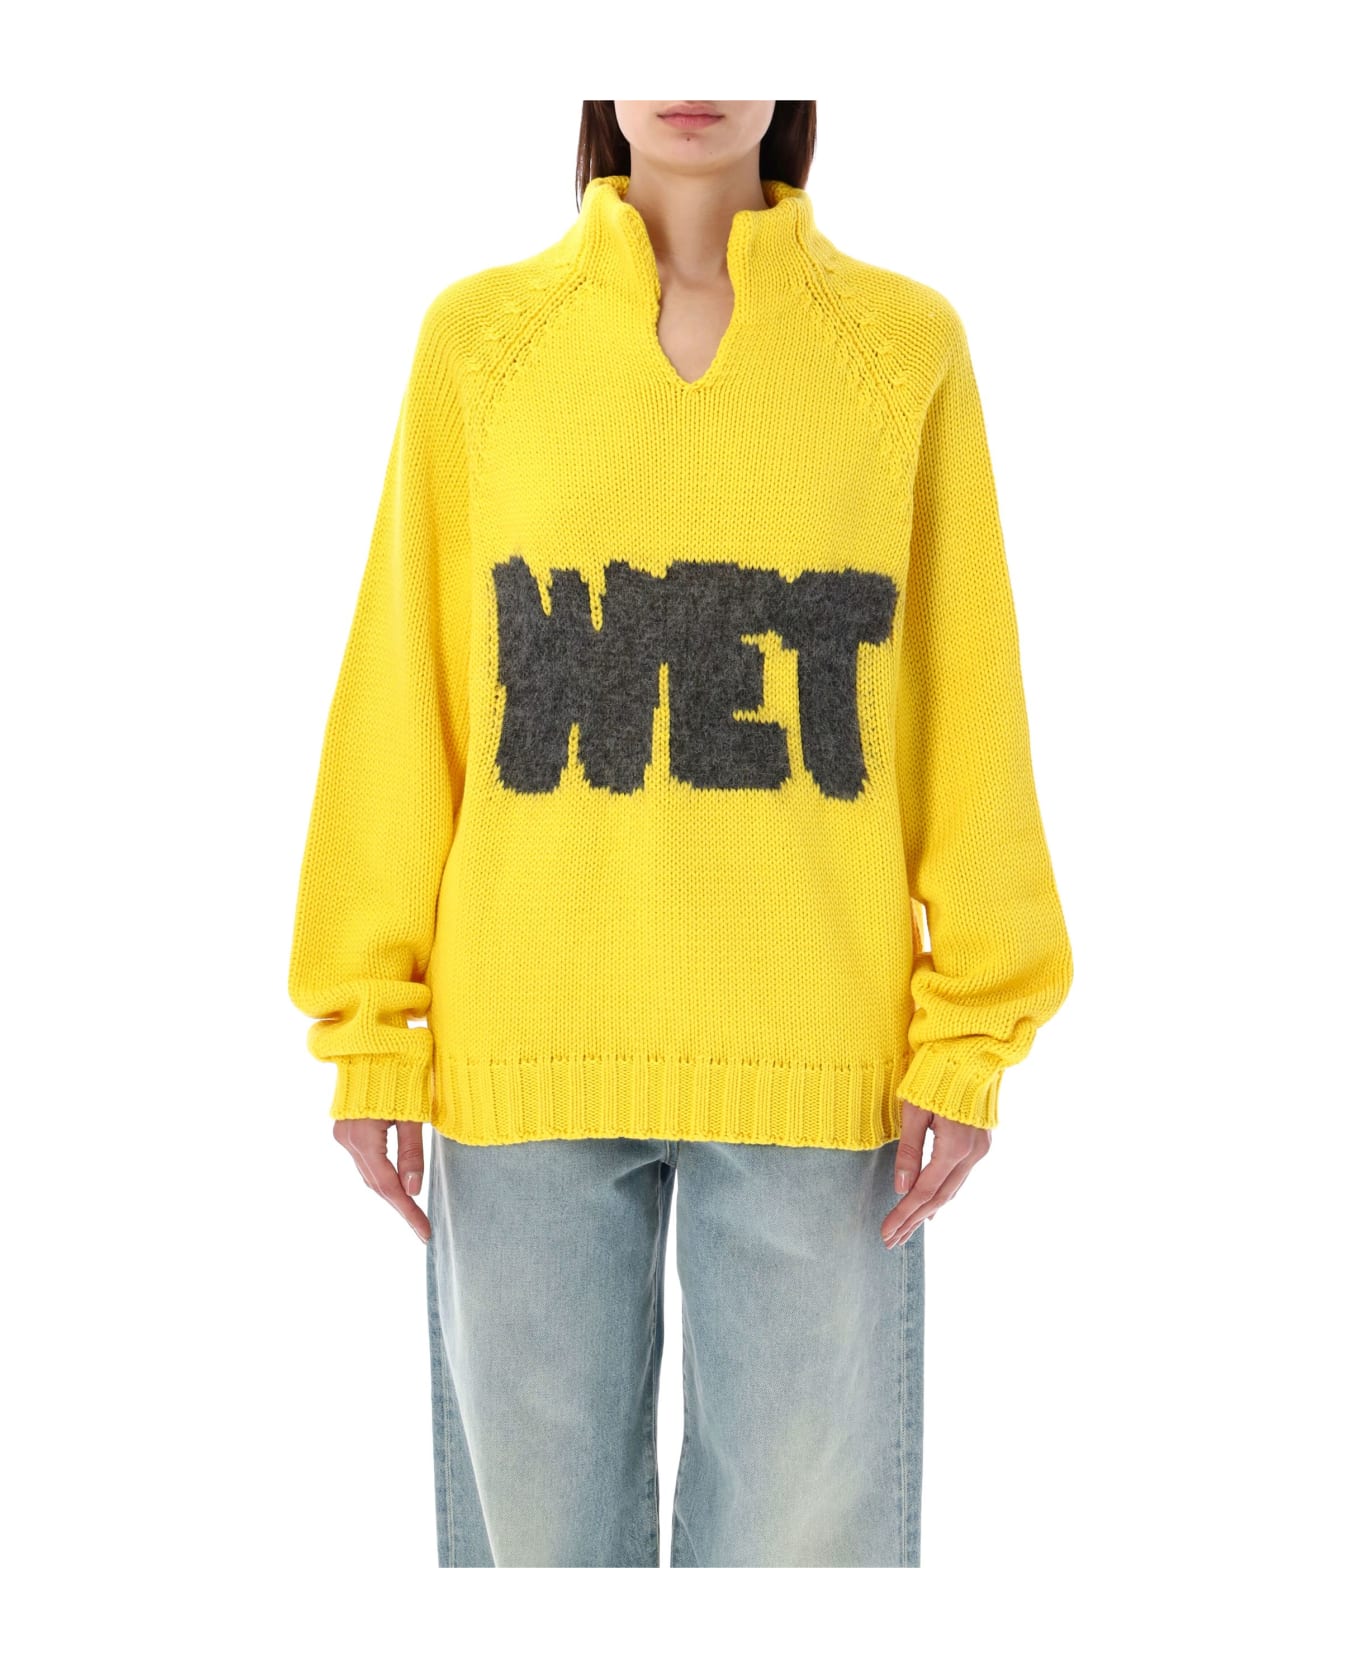 ERL Wet Sweater - YELLOW トップス